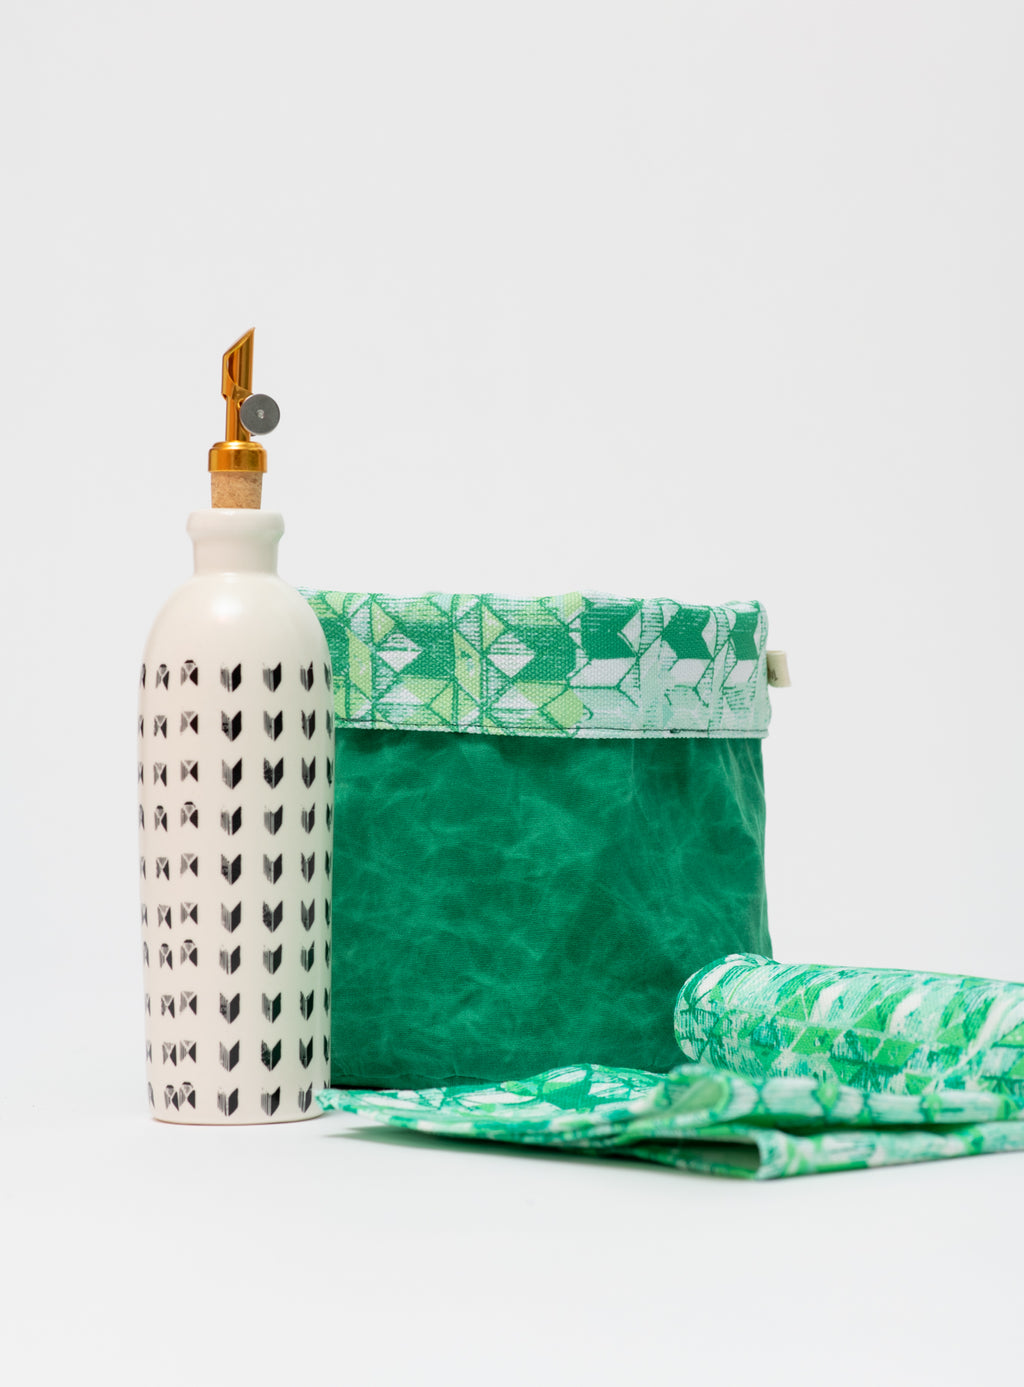 Oil dispenser, linen kitchen towels and reversible cover basket 'Tangy ...